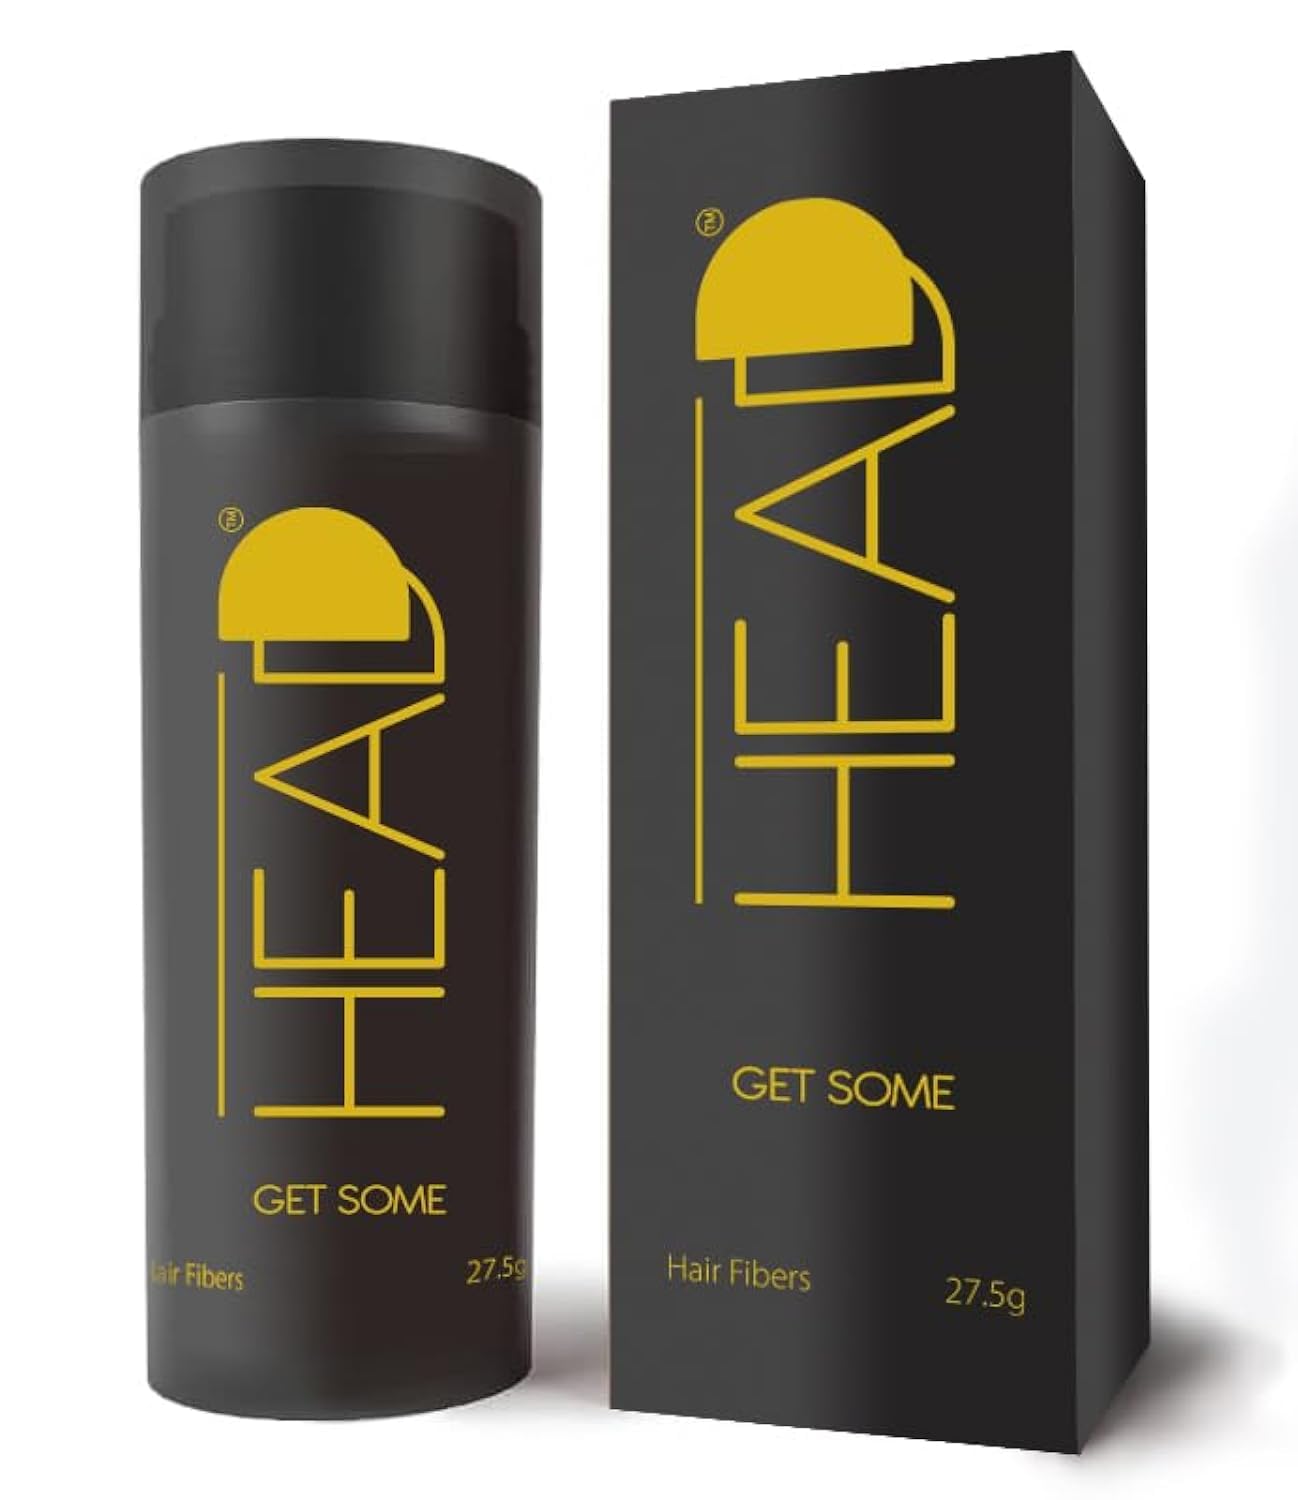 HEADD (BLACK) | Hair Fibres for men and women | Thicker Hair | Lightweight | Waterproof | Windproof | No more clumps | 27.5g | The sexiest way to fuller hair!!